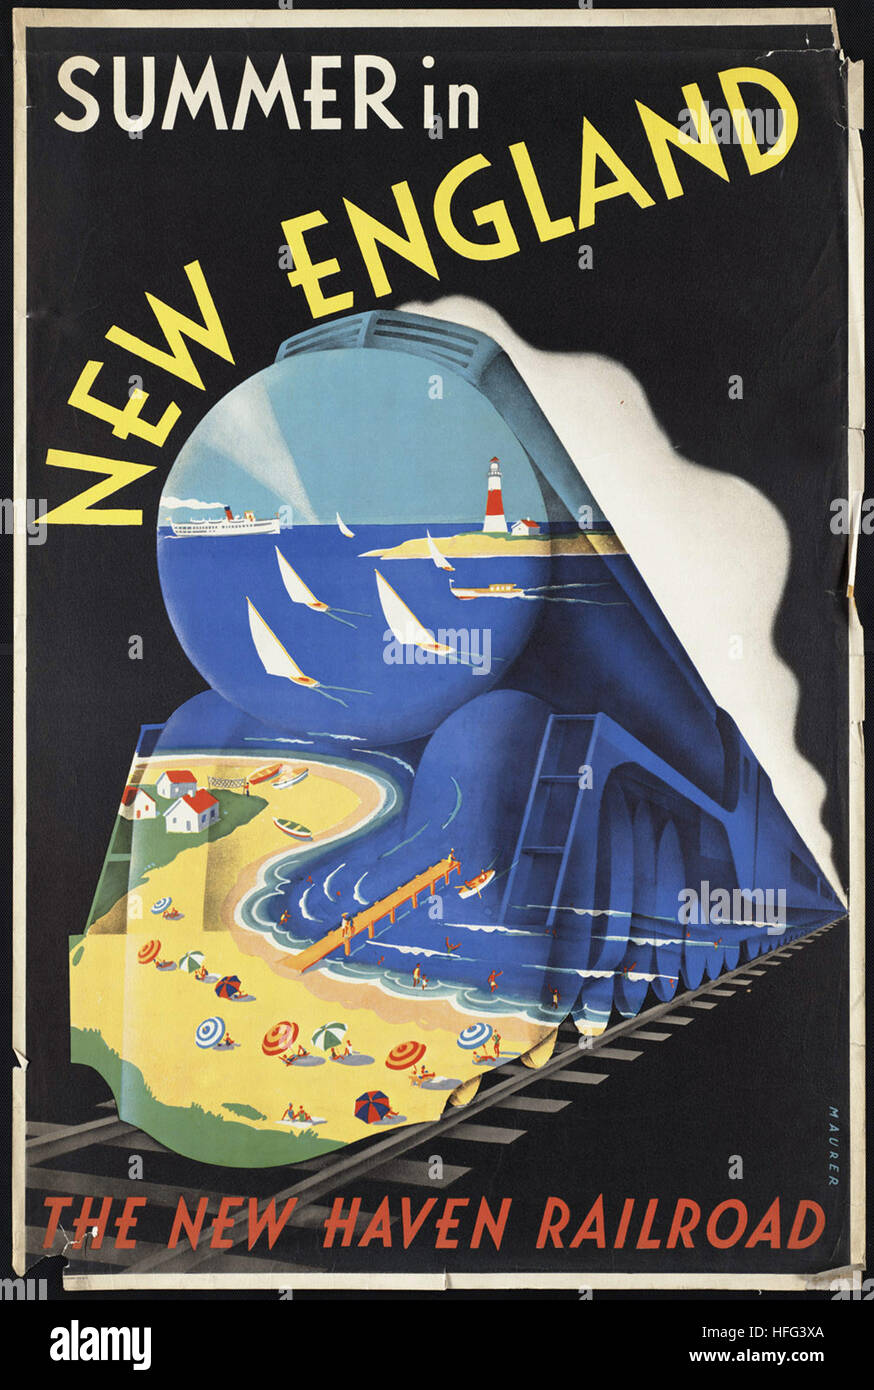 Vintage United /"NEW ENGLAND/" Travel Poster 11 by 17